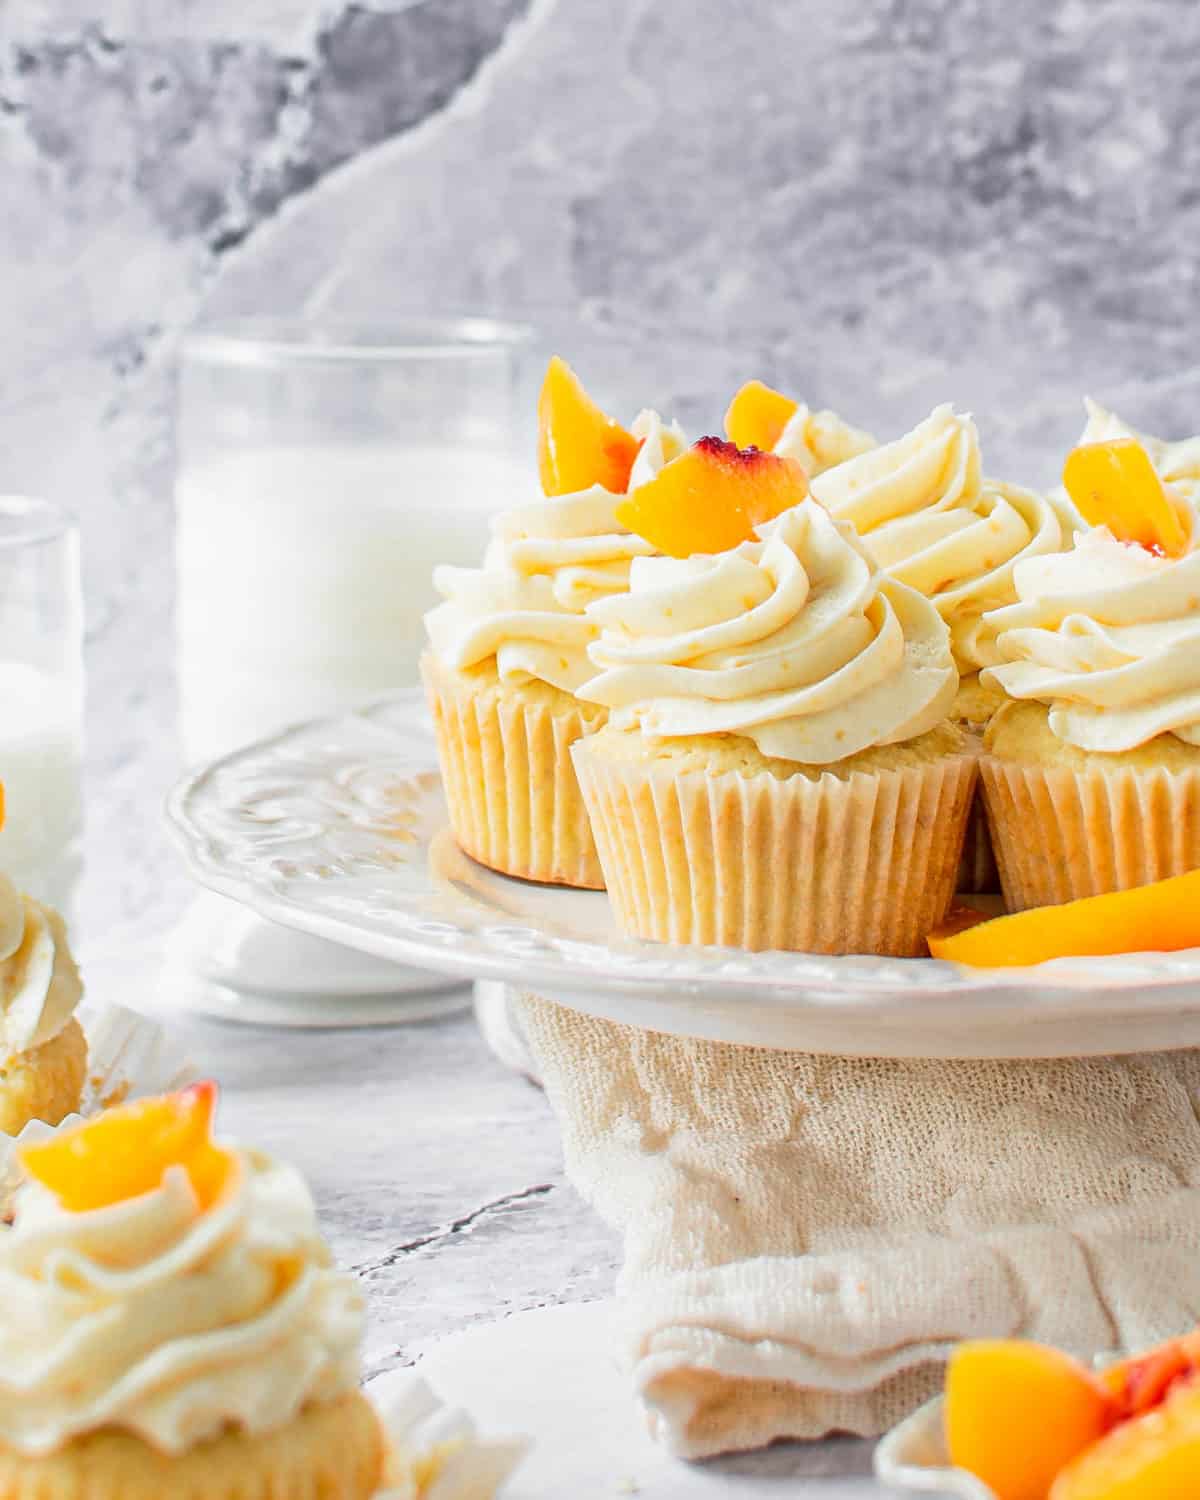 Several peach cupcakes on a cake stand.